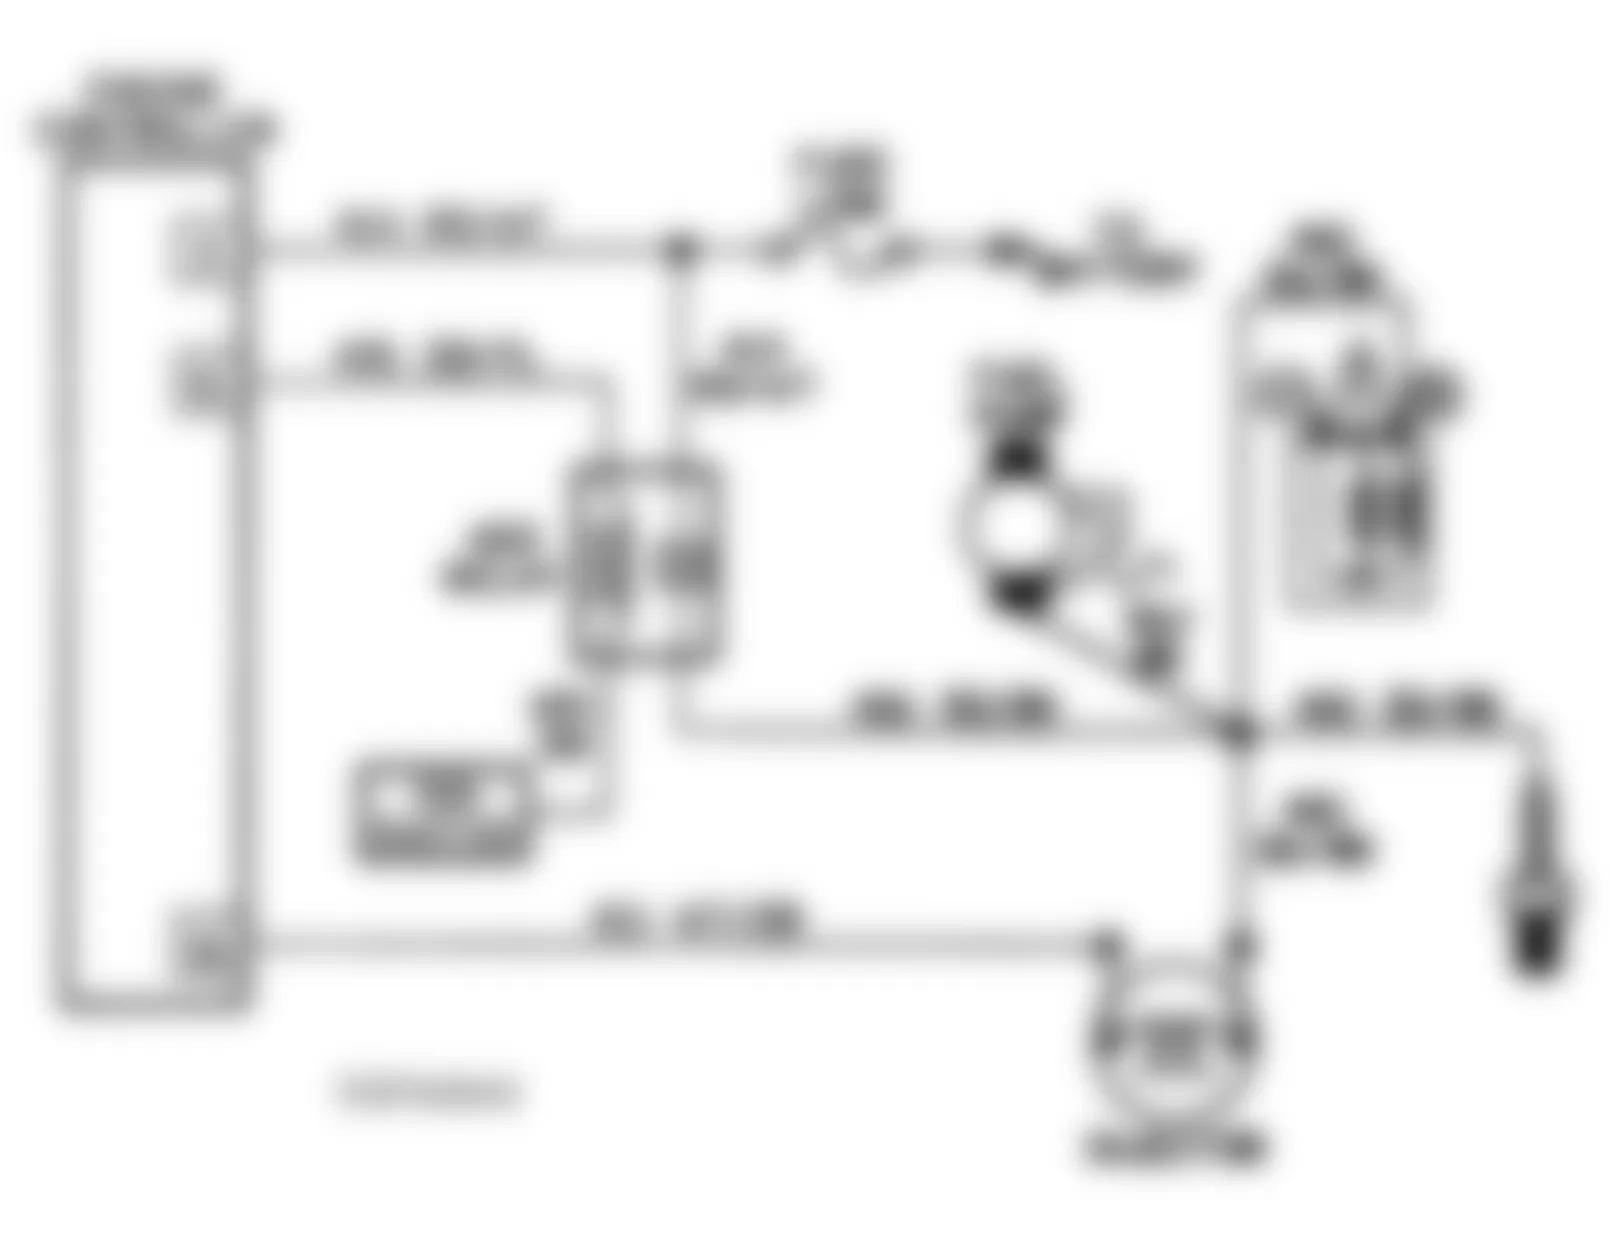 Chrysler LeBaron 1991 - Component Locations -  Test NS-11A Code 42, Circuit Diagram.